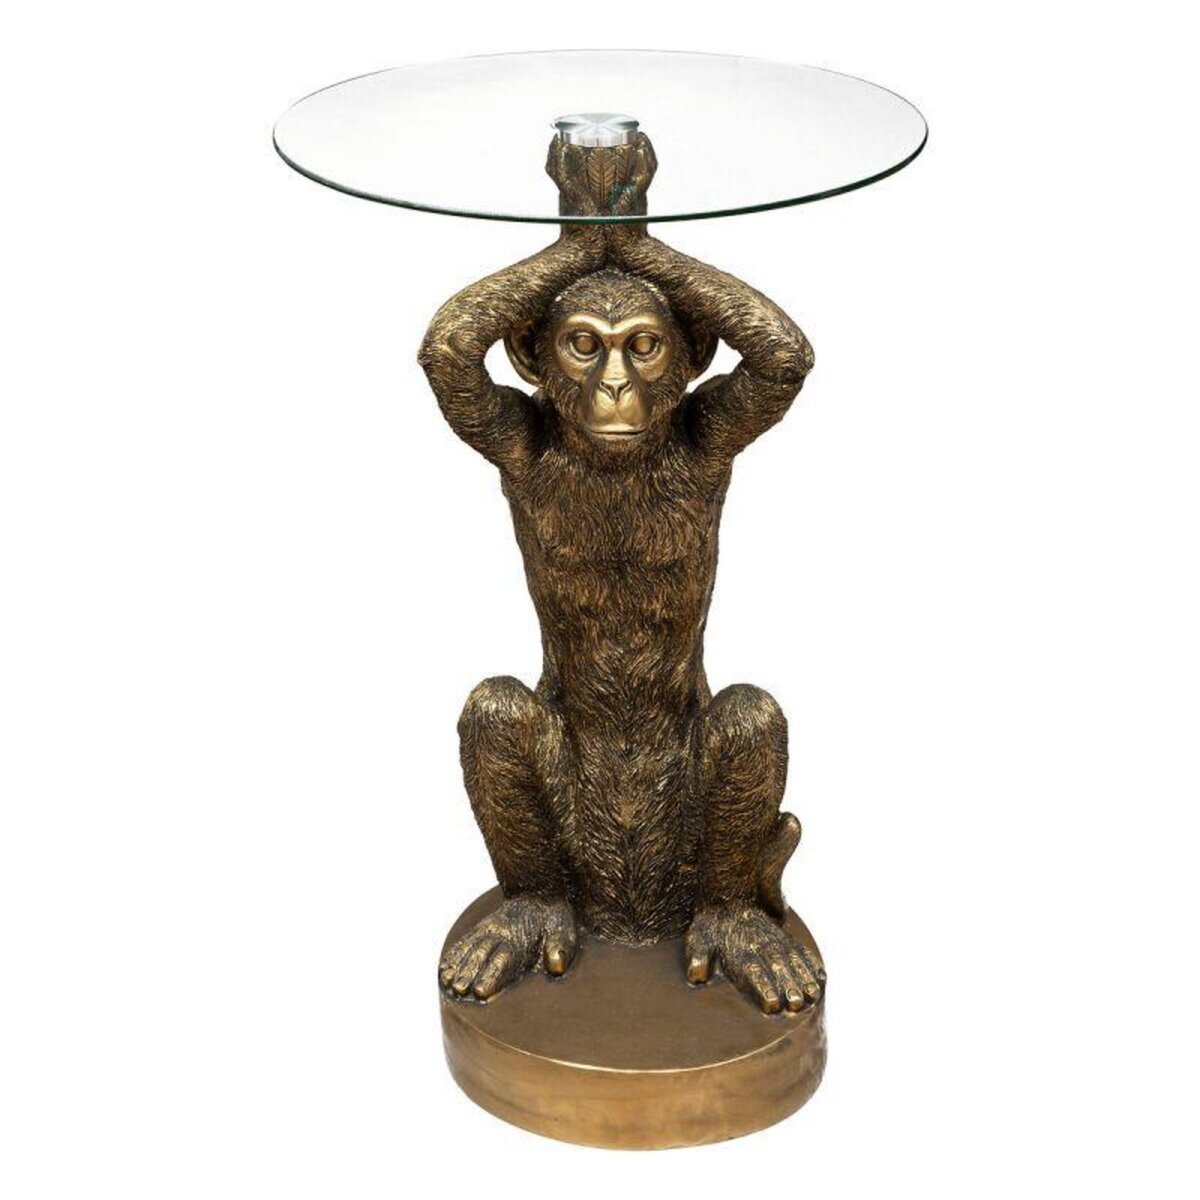  Table d'Appoint Design  Wild Monkey  52cm Or